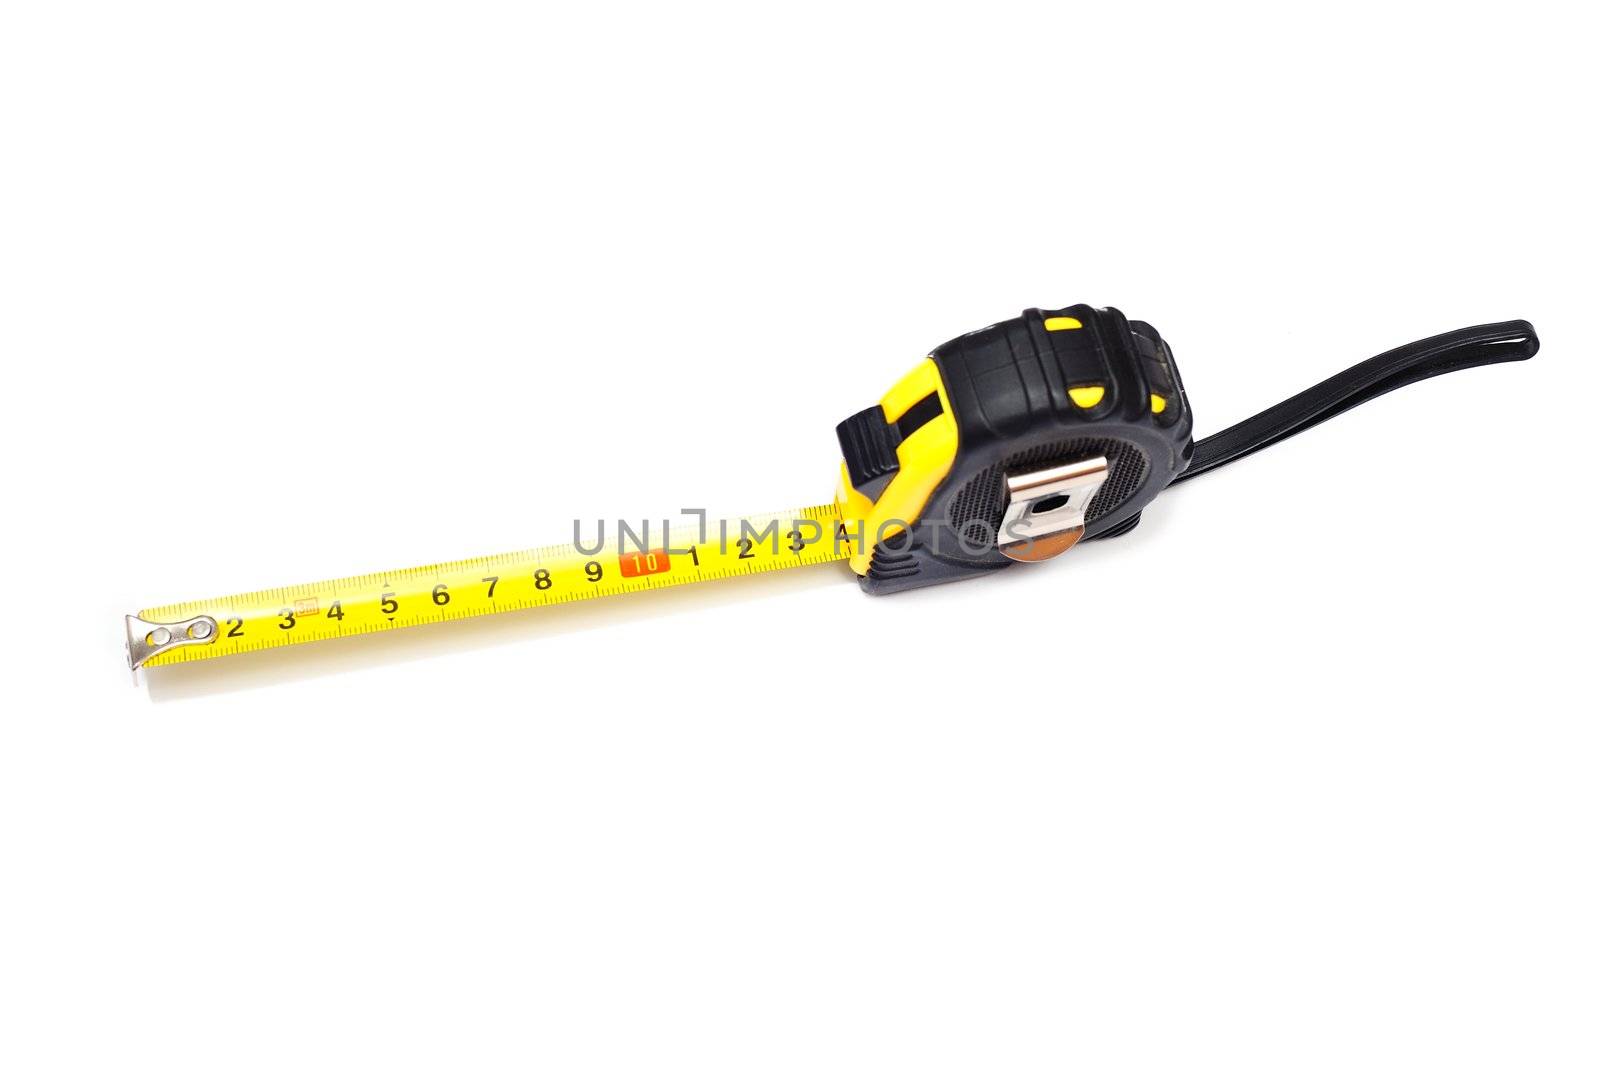 Extended retractable tape measurer on a white background 